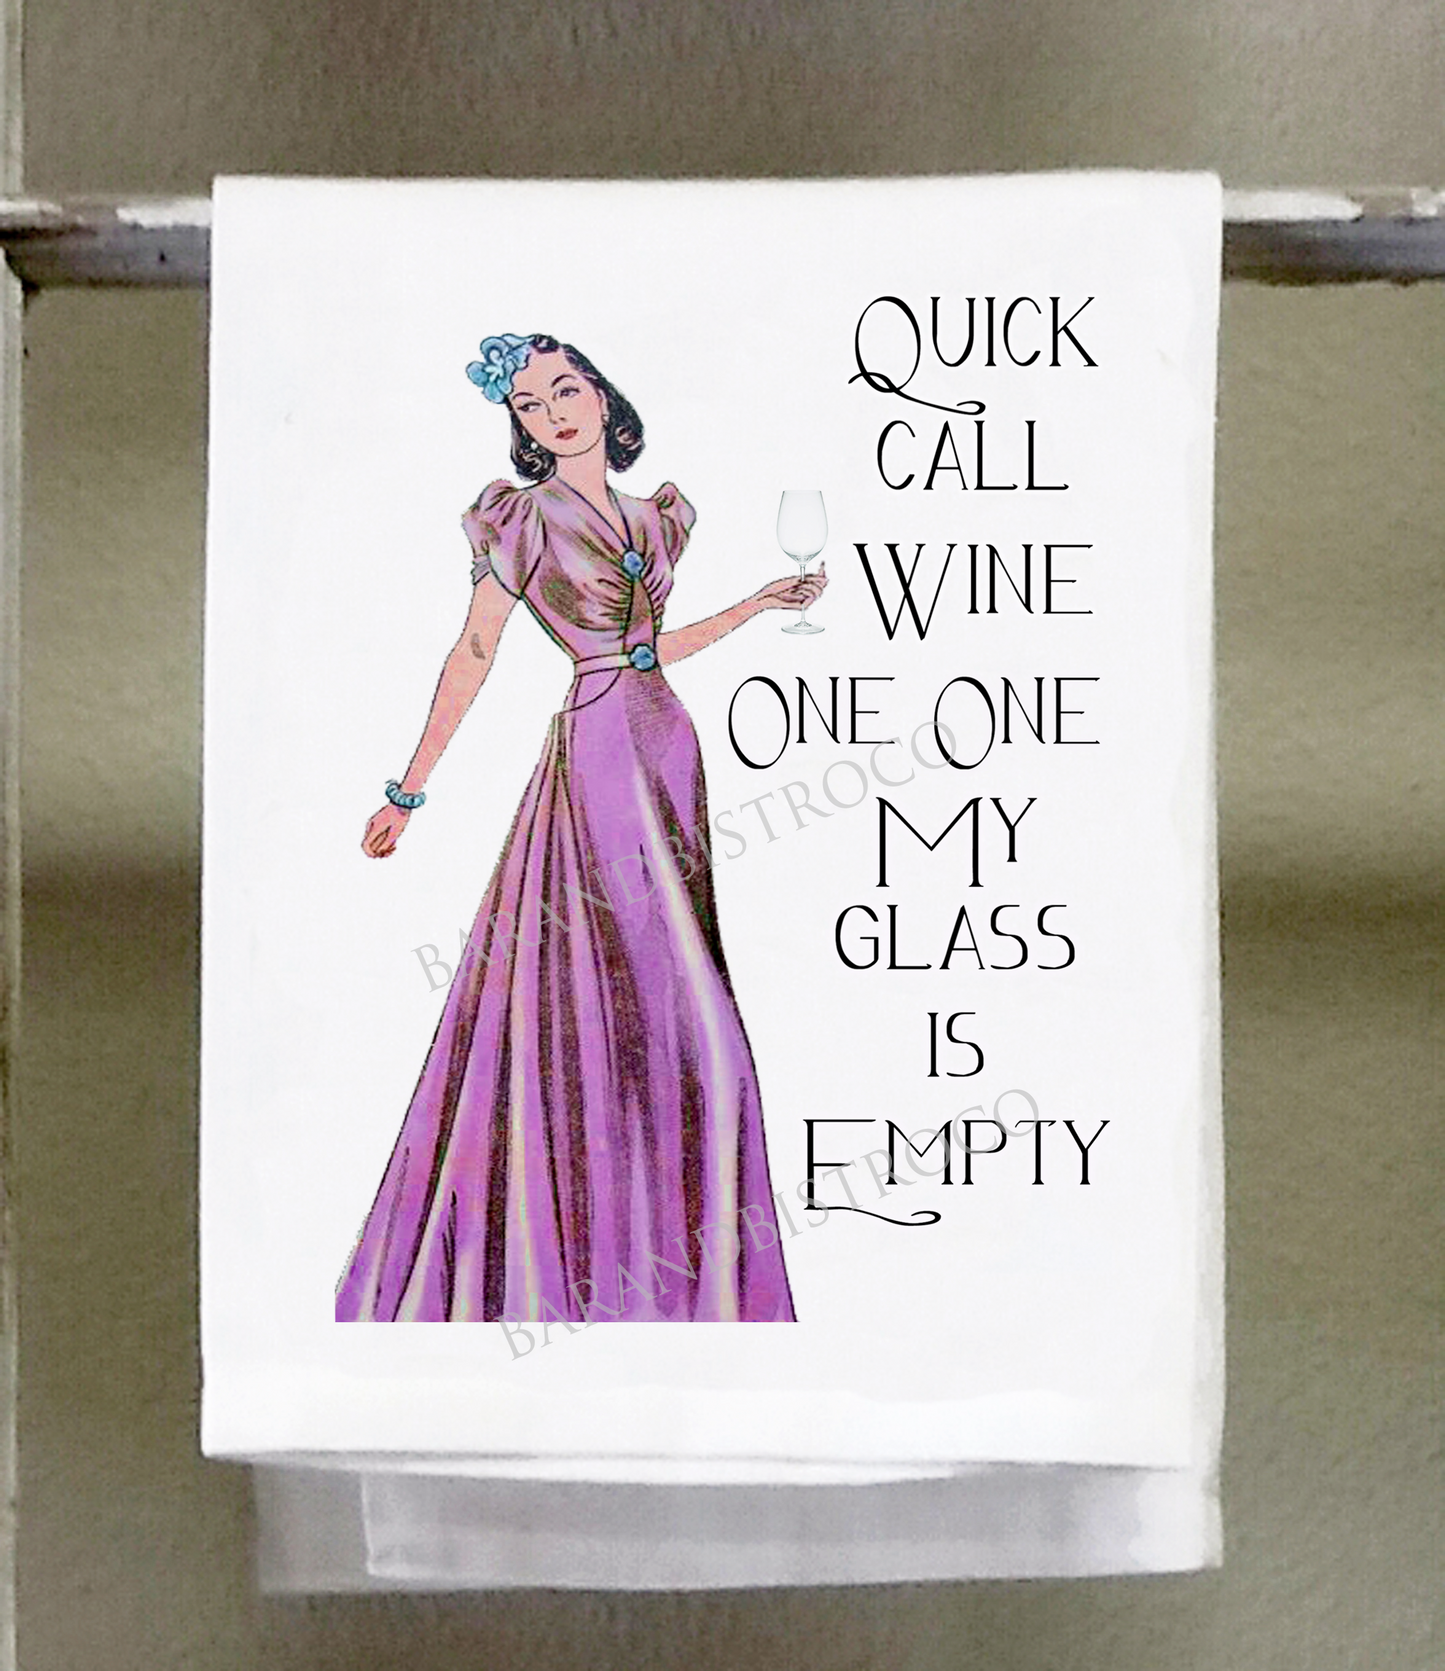 Sassy Girl, Quick call wine one one my glass is empty